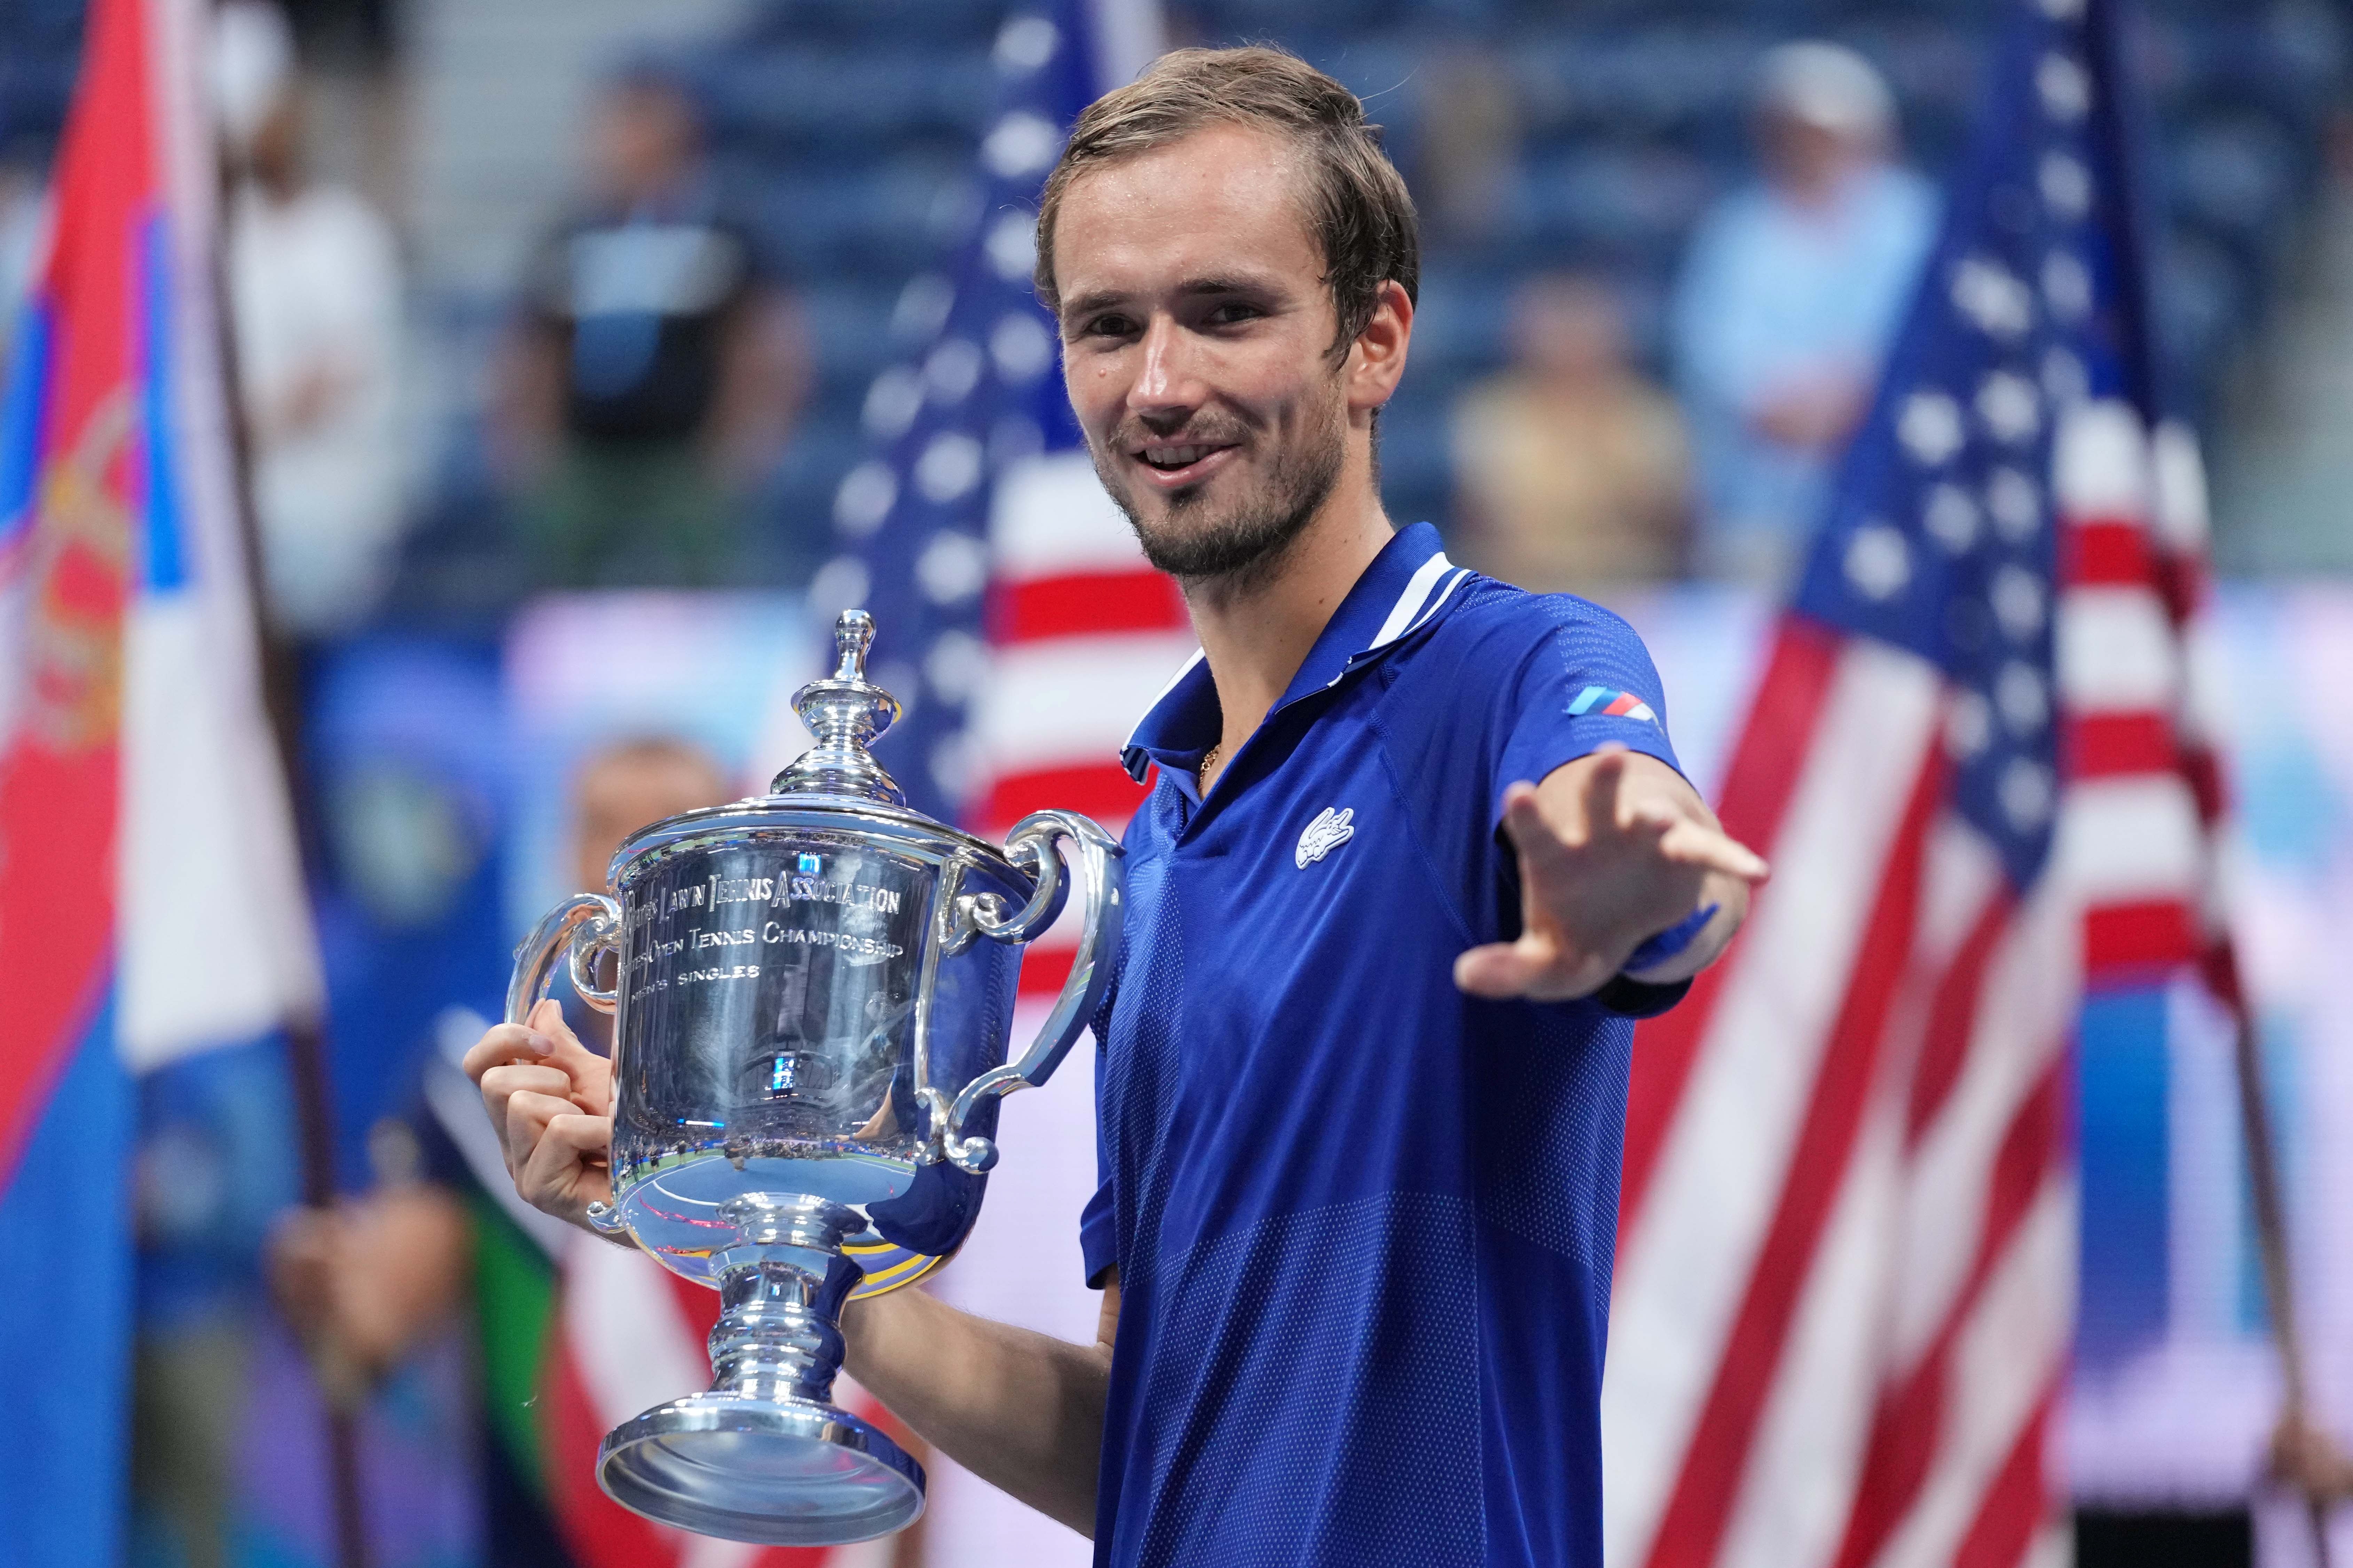 Medvedev delivers on biggest stage to win US Open